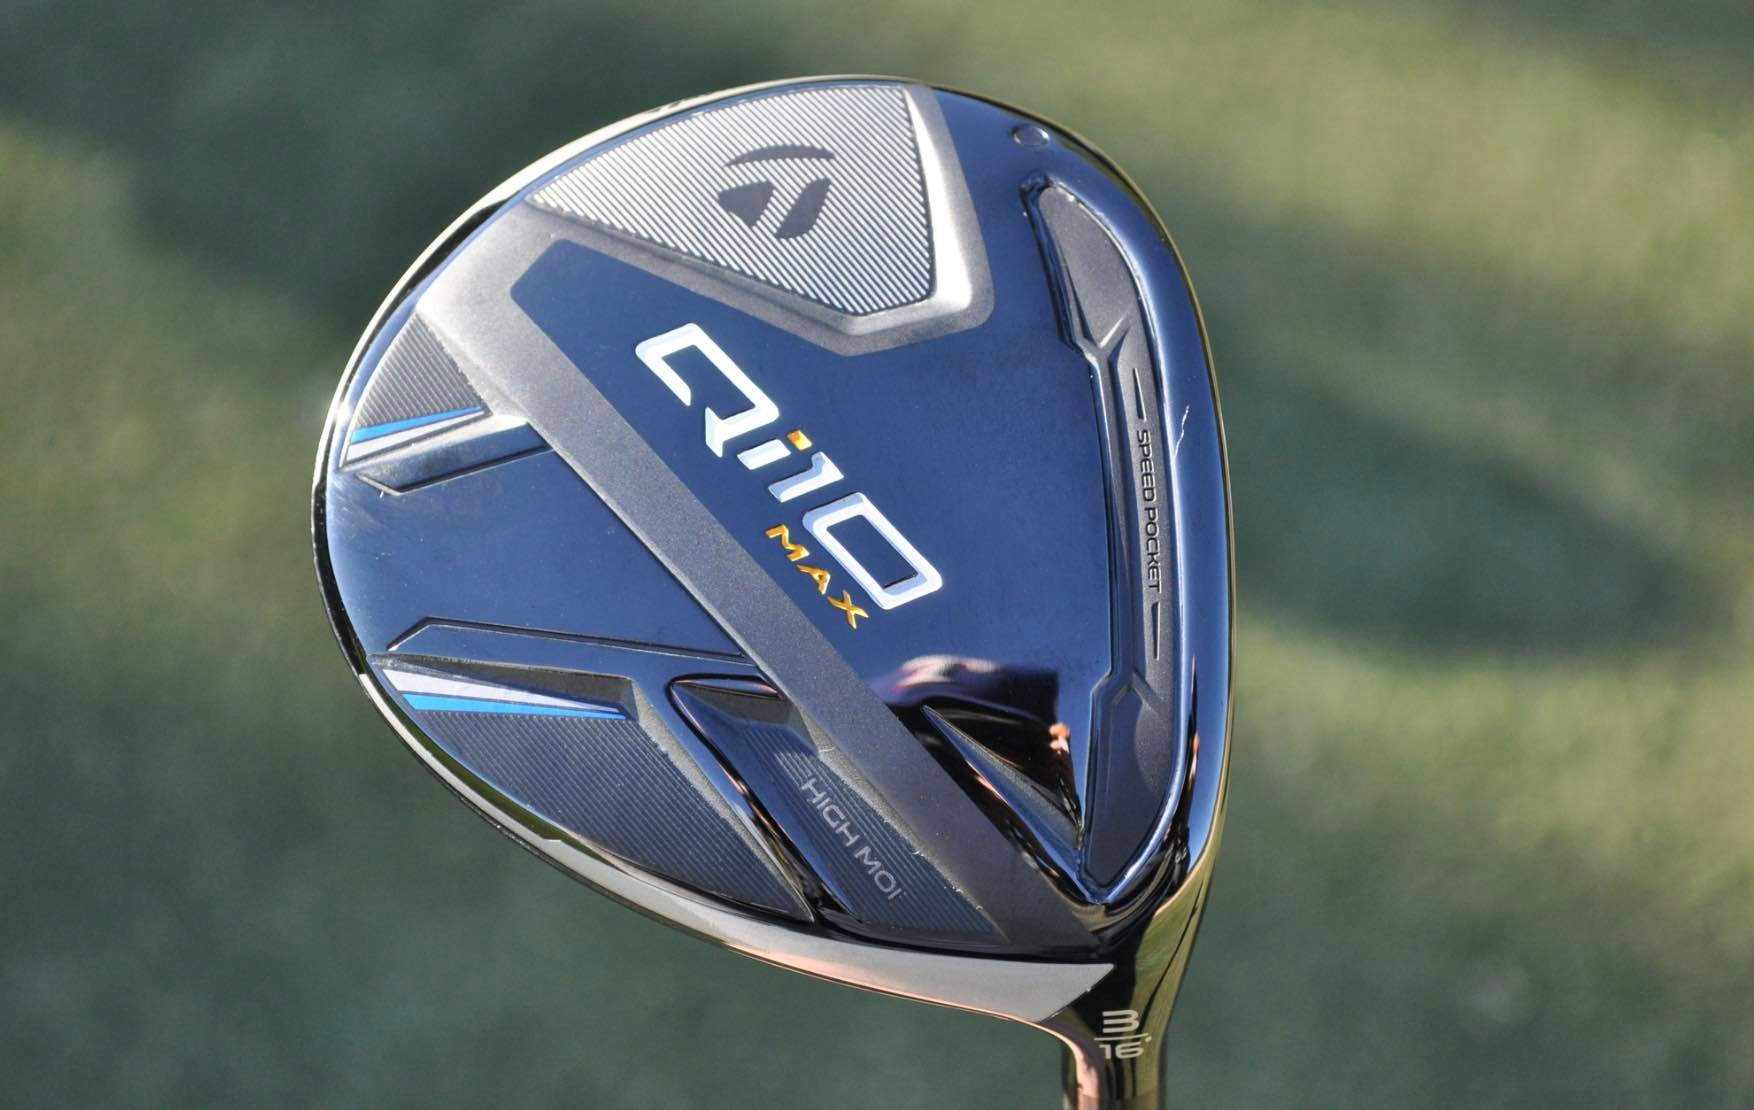 TaylorMade Qi10 fairways & hybrids: 5 things you need to know